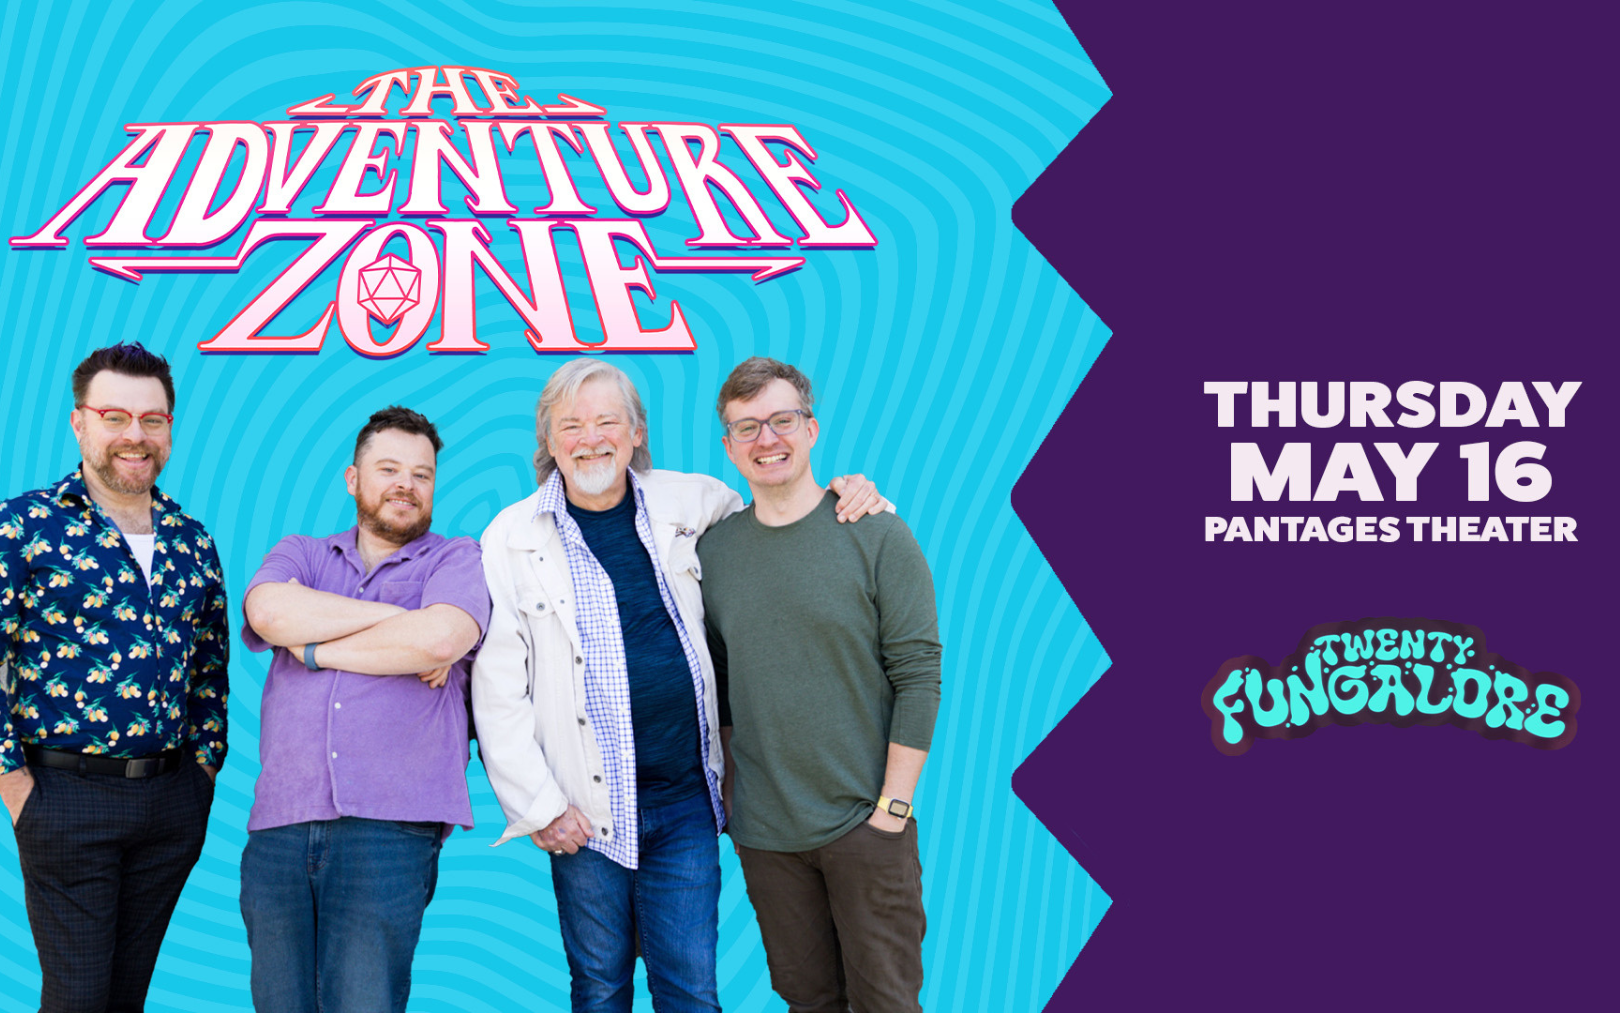 More Info for McElroys: The Adventure Zone